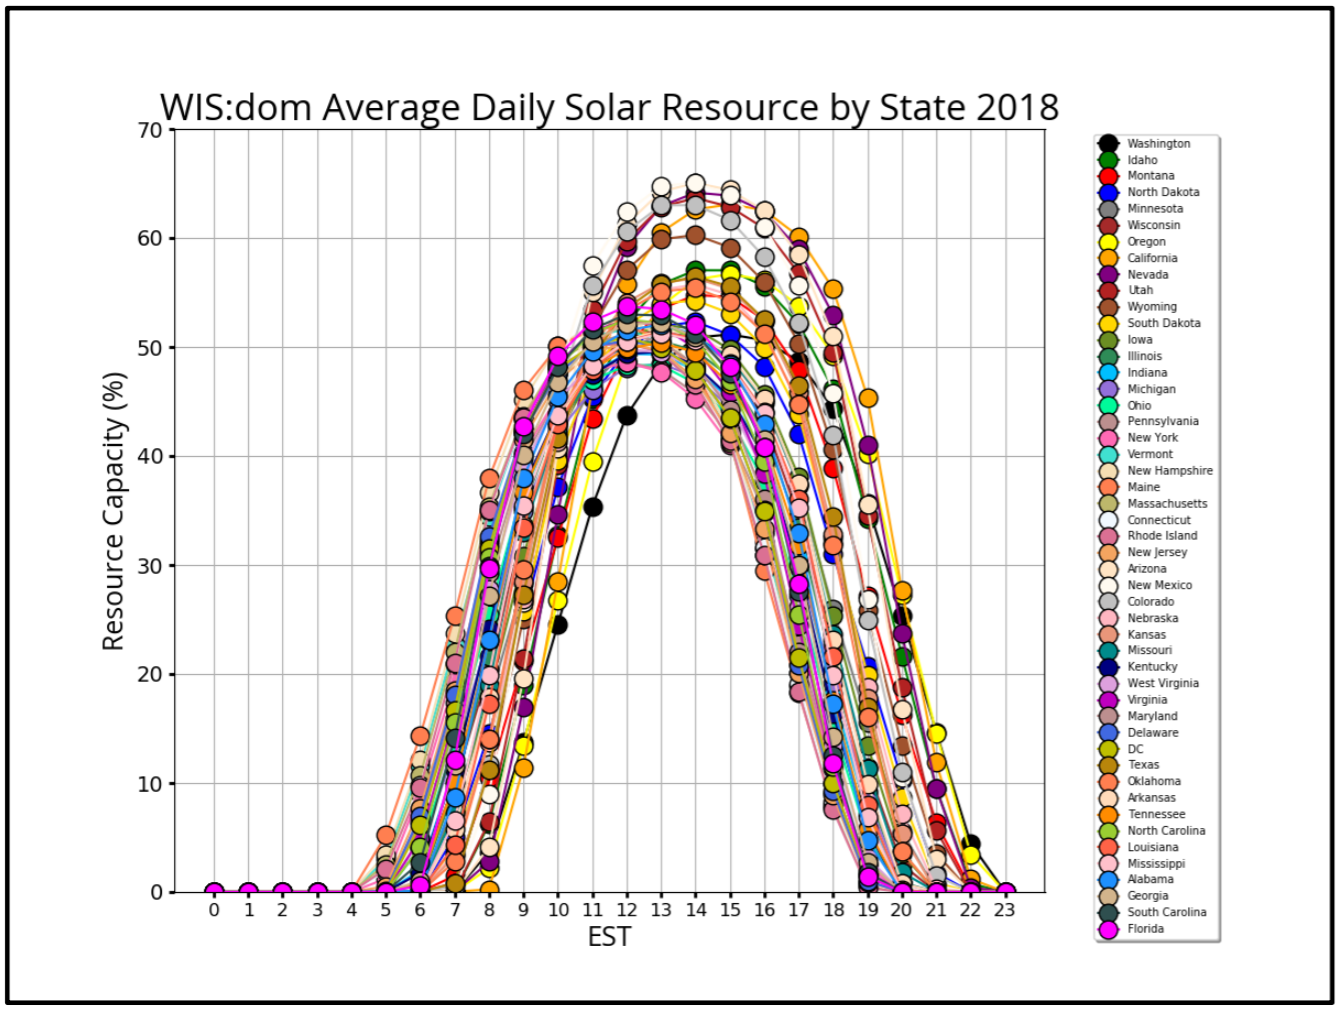 Figure 4.40: The 2018 average hourly solar resource capacity for each state